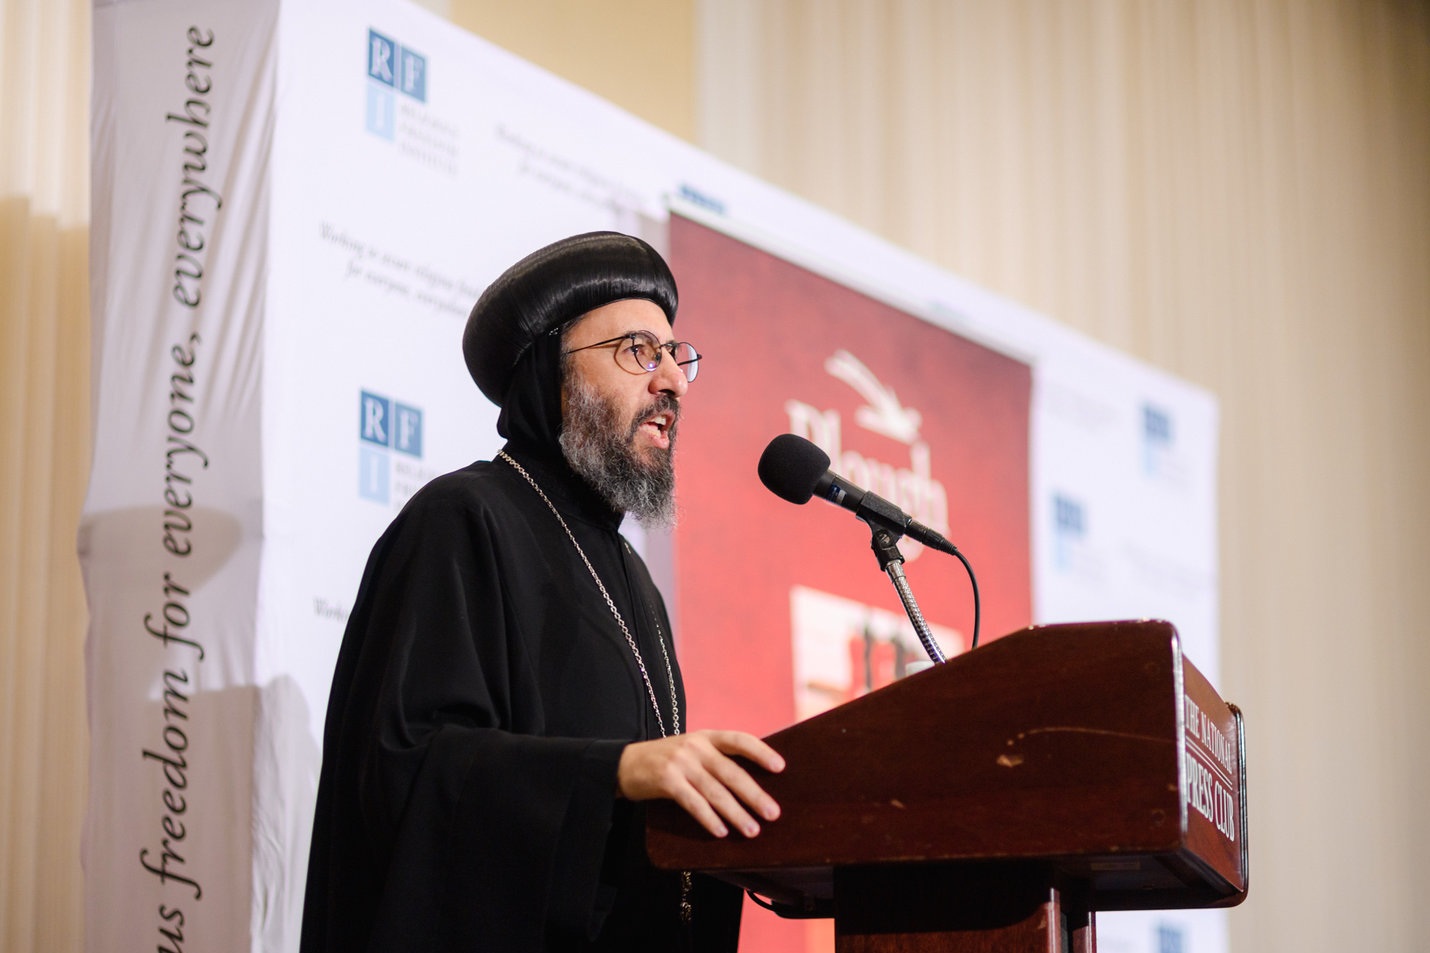  Archbishop Angaelos, Coptic Orthodox Archbishop of London, delivers a keynote address on the impact of the 21 martyrs four years after they were killed in Libya.  